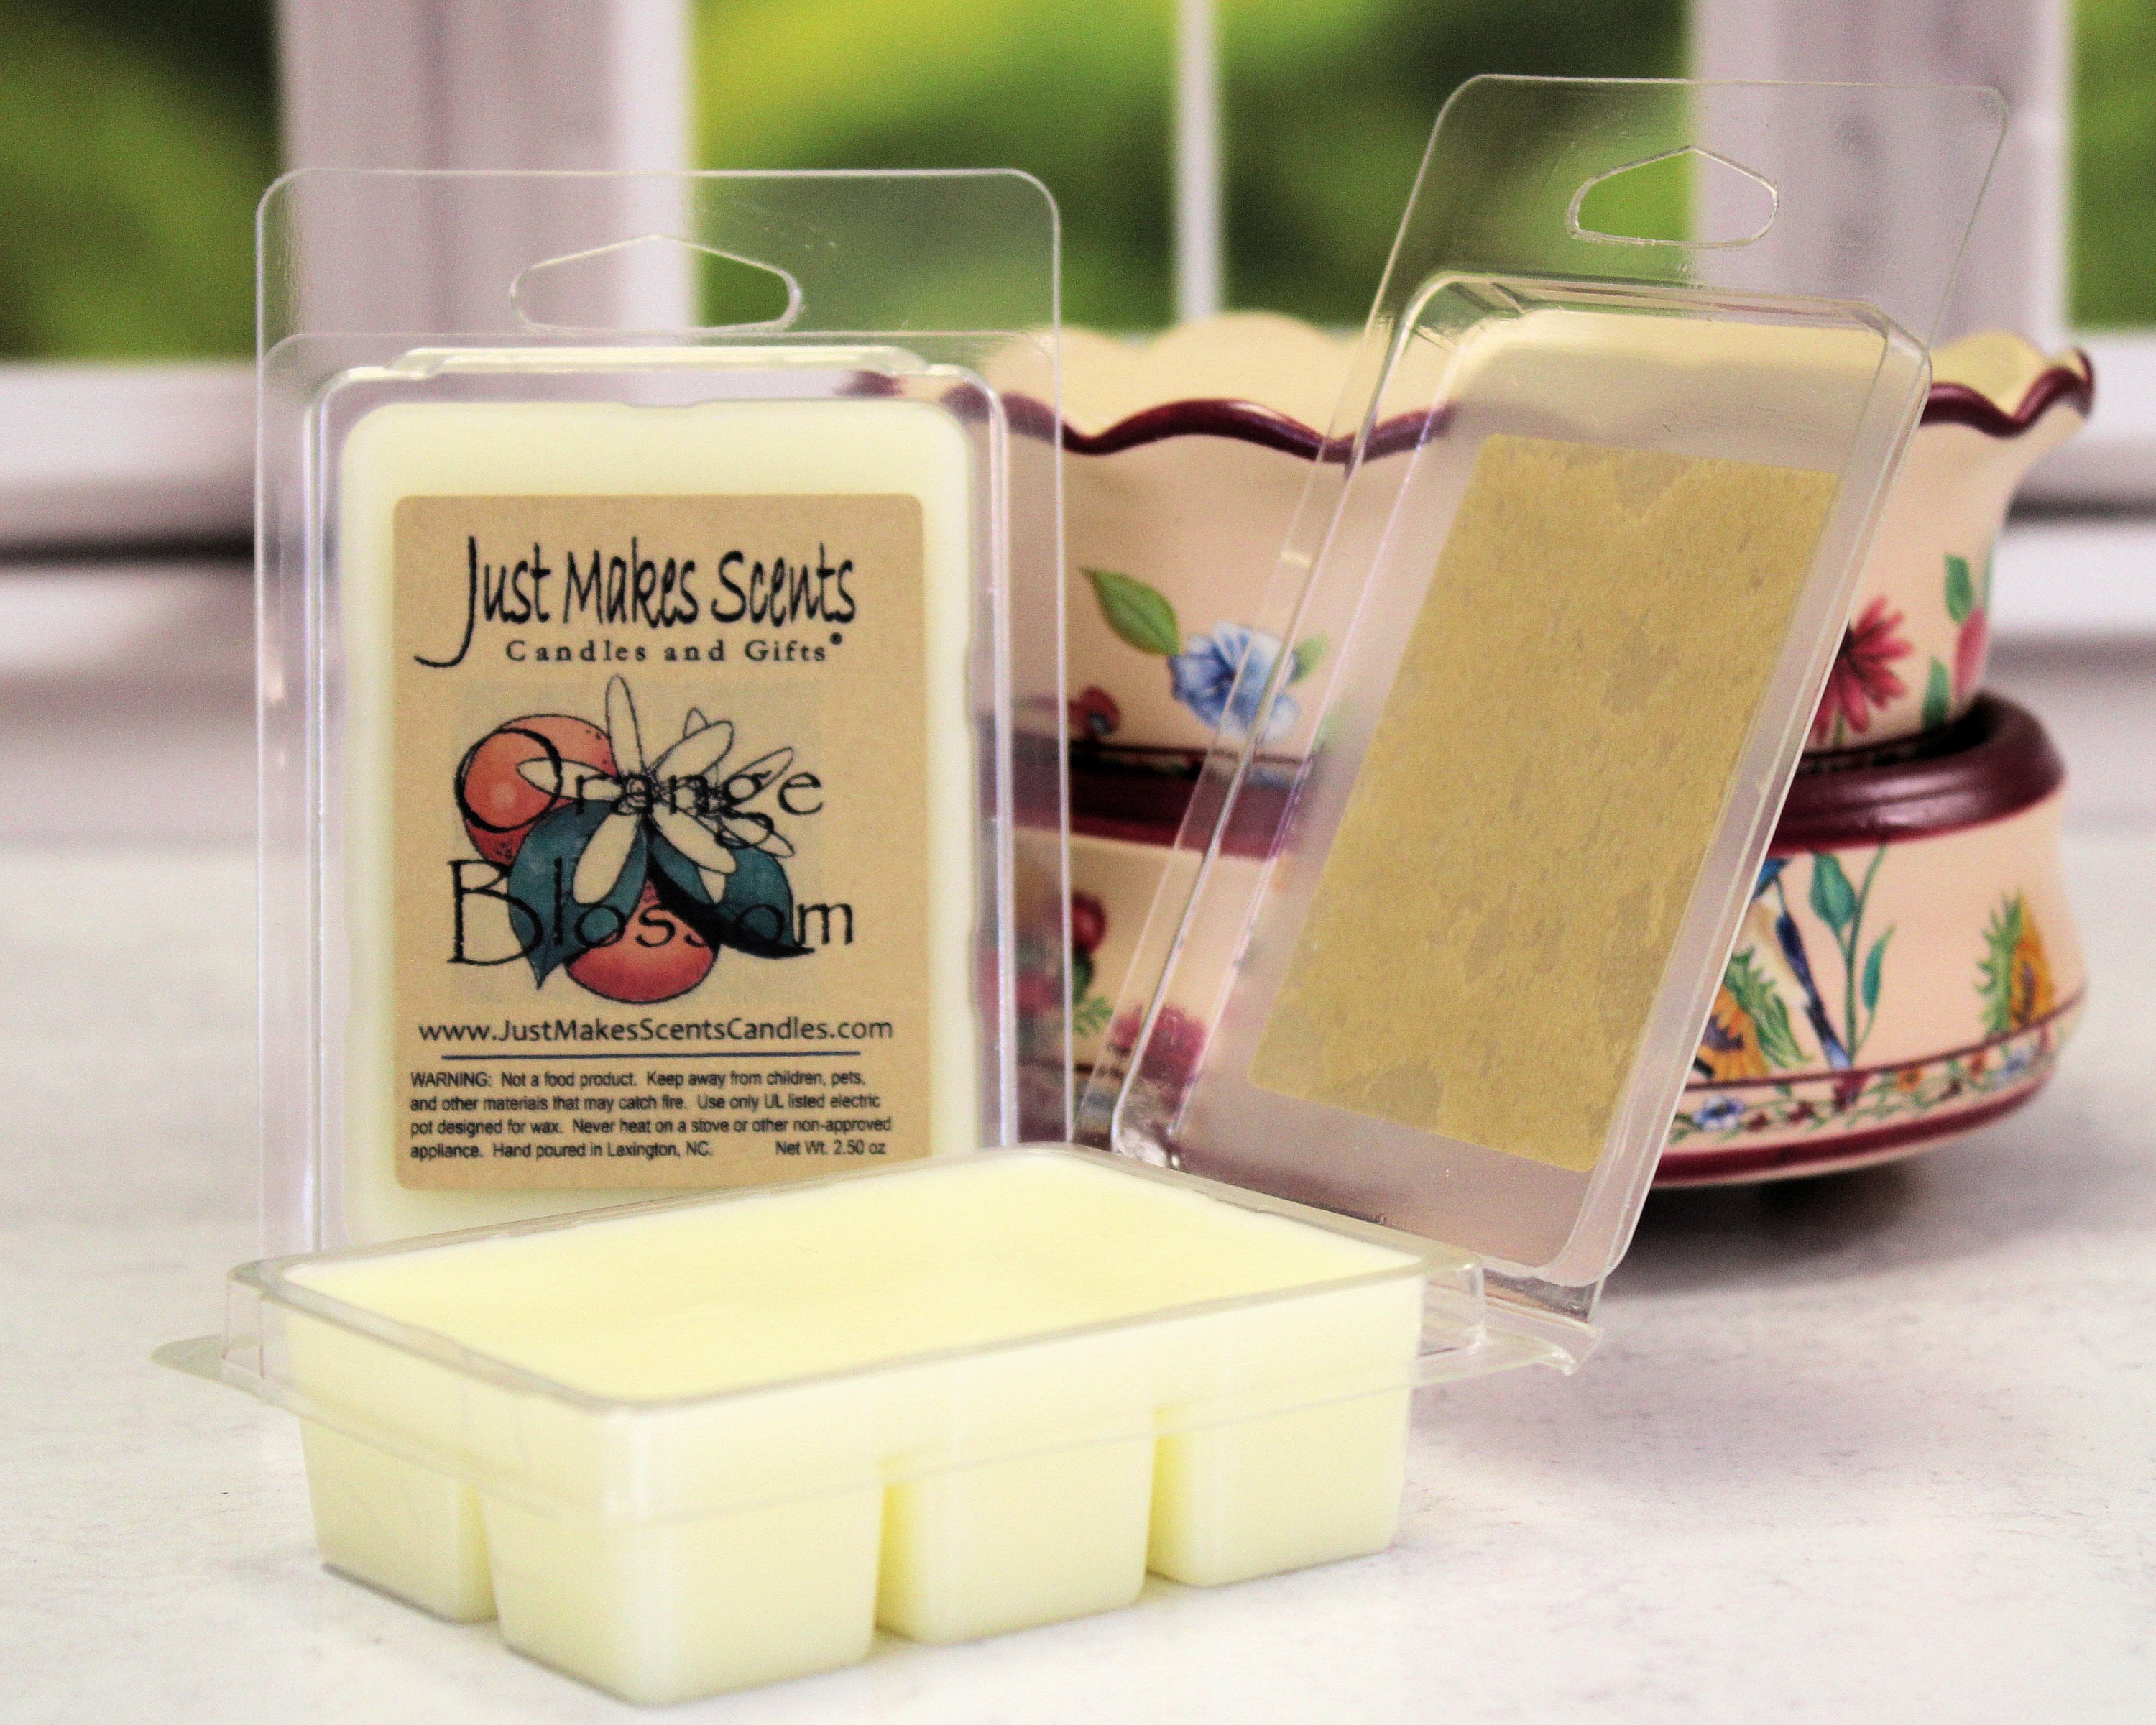 Orange Blossom Scented Wax Melts 2 Pack With FREE SHIPPING Scented Wax  Cubes Compare to Scentsy® Bars 